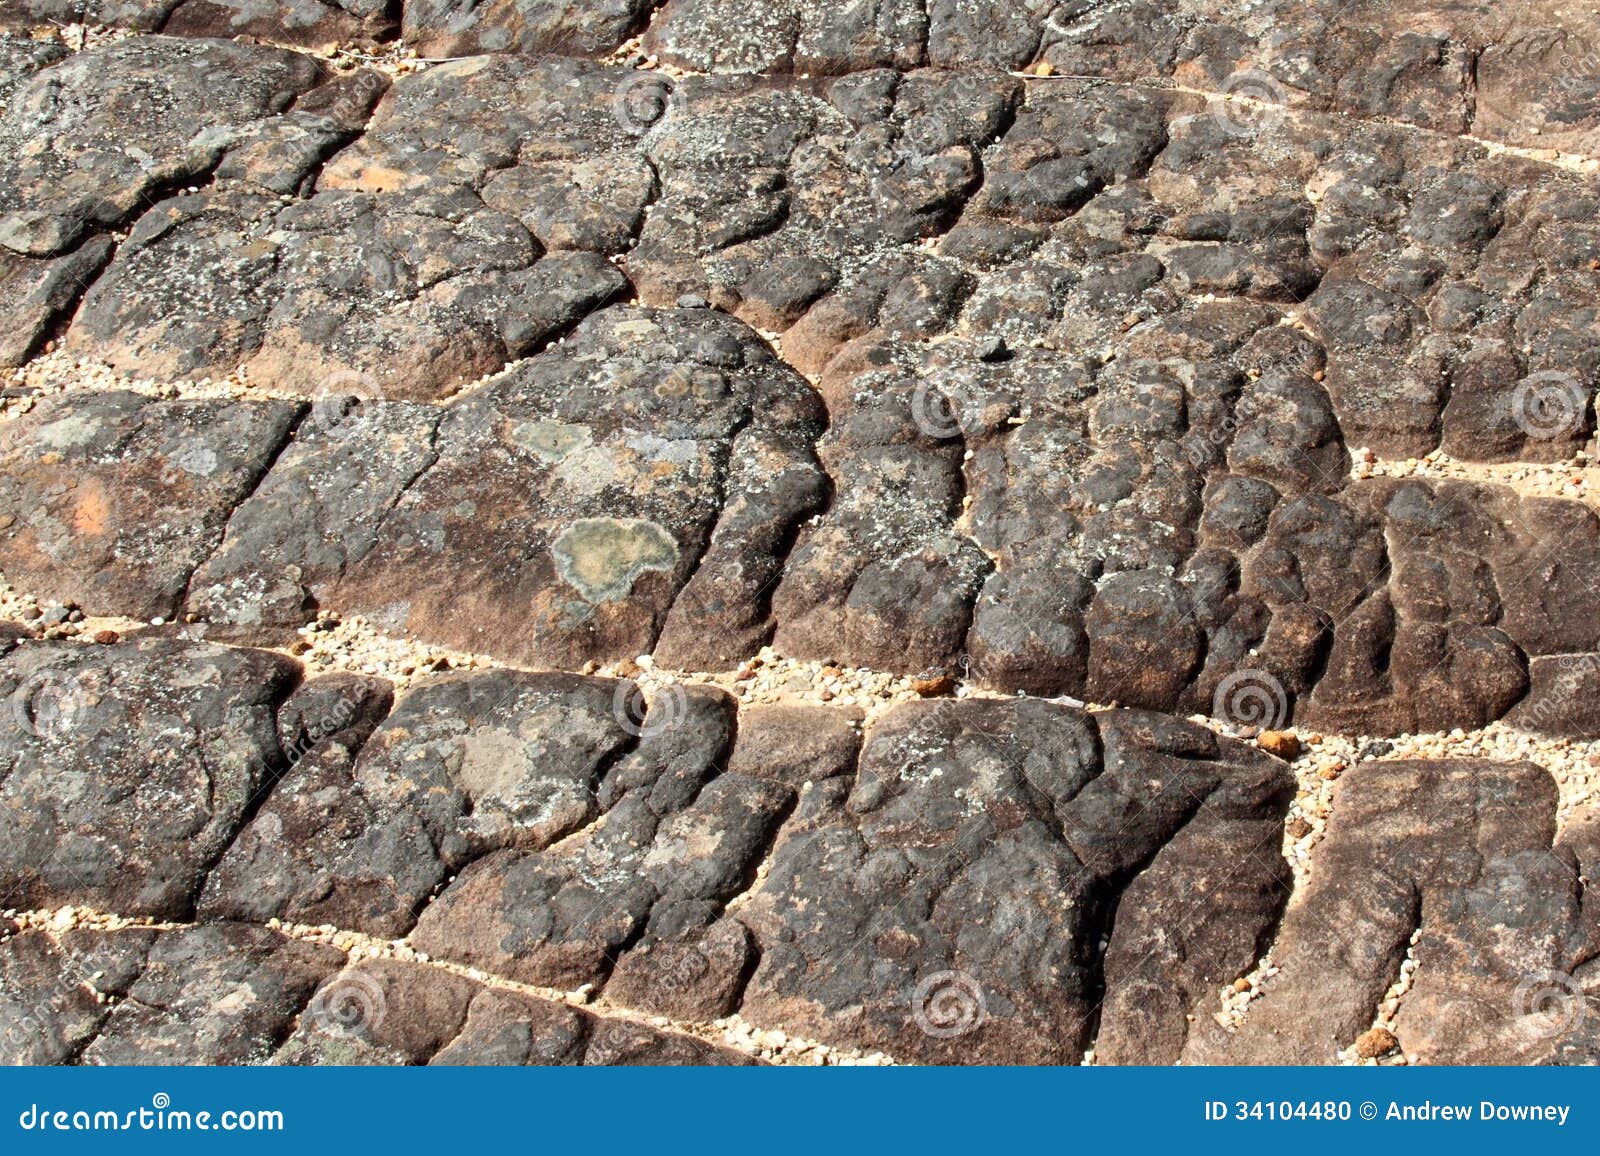 texture-mountain-rock-eroded-surface-clo